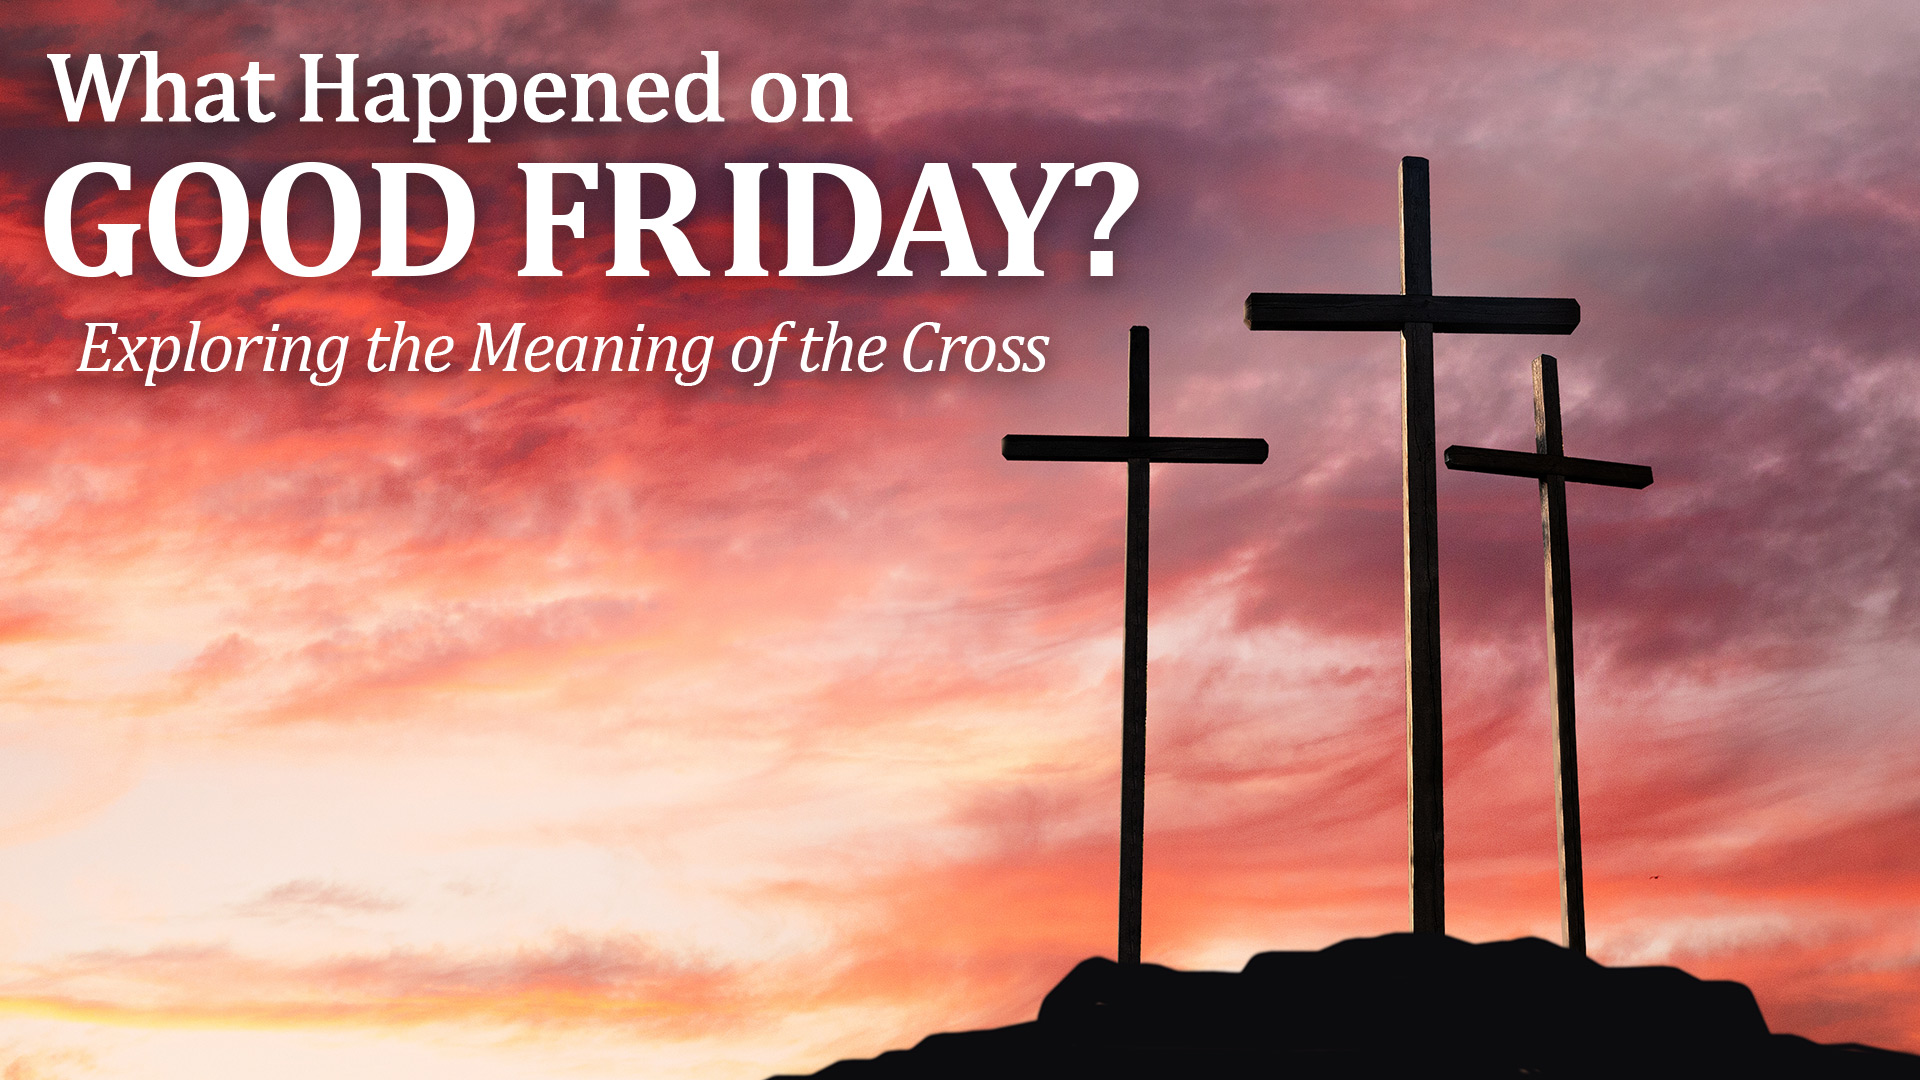 What Happened on Good Friday?
Exploring the Meaning of the Cross
